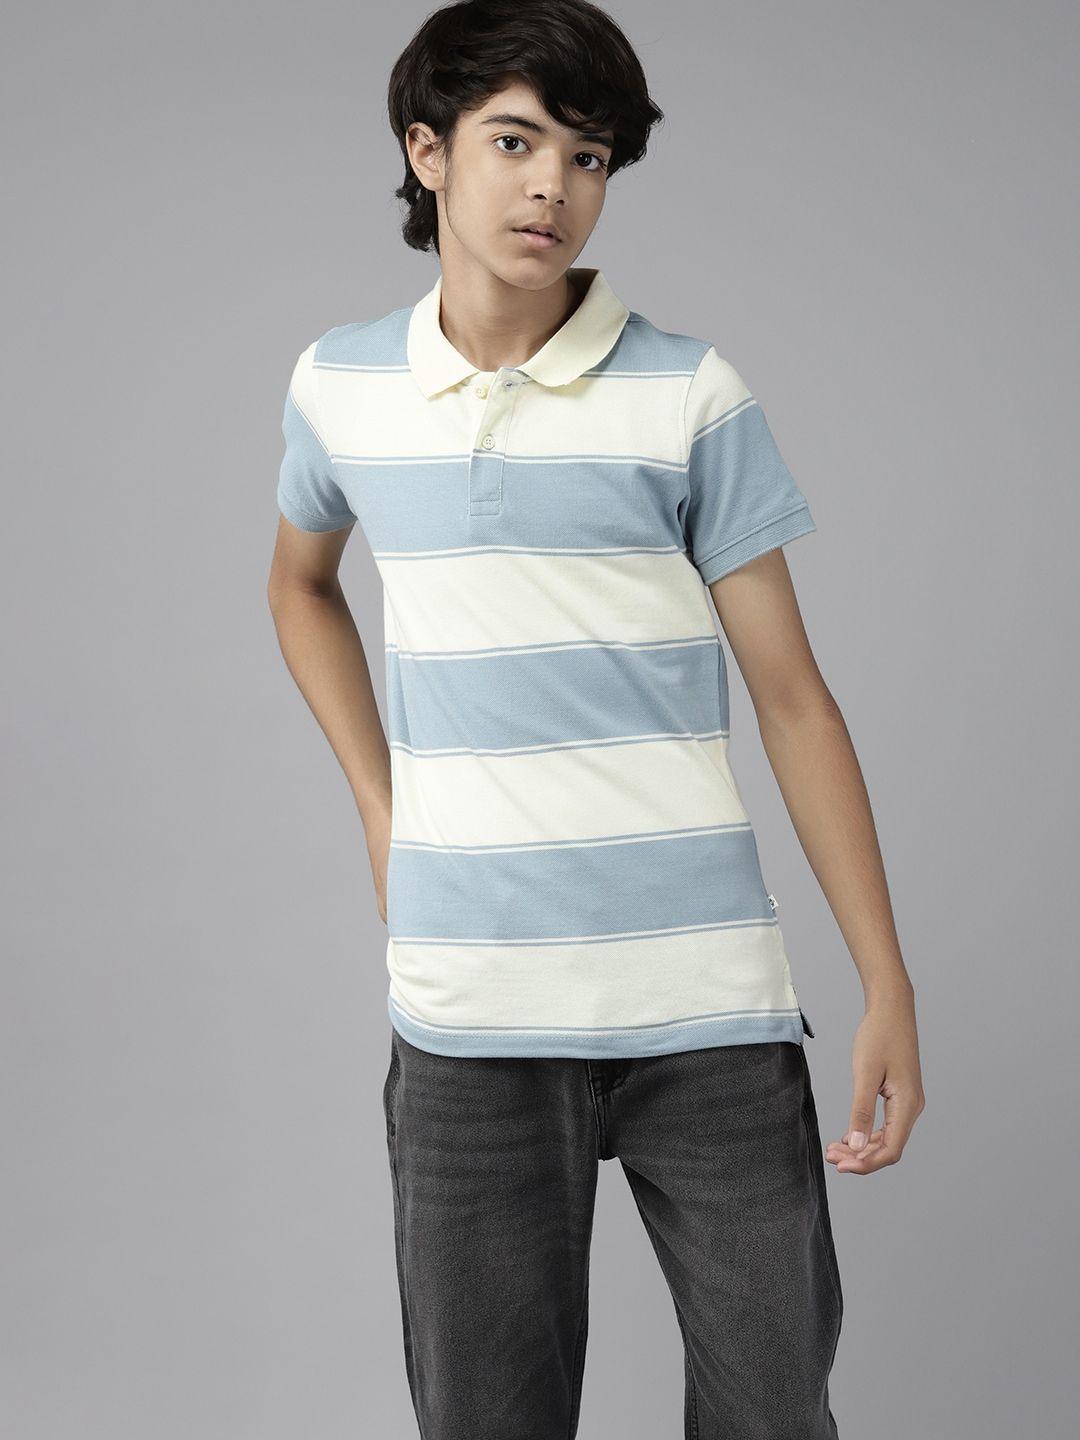 uth by roadster boys off white & blue striped polo collar pure cotton t-shirt